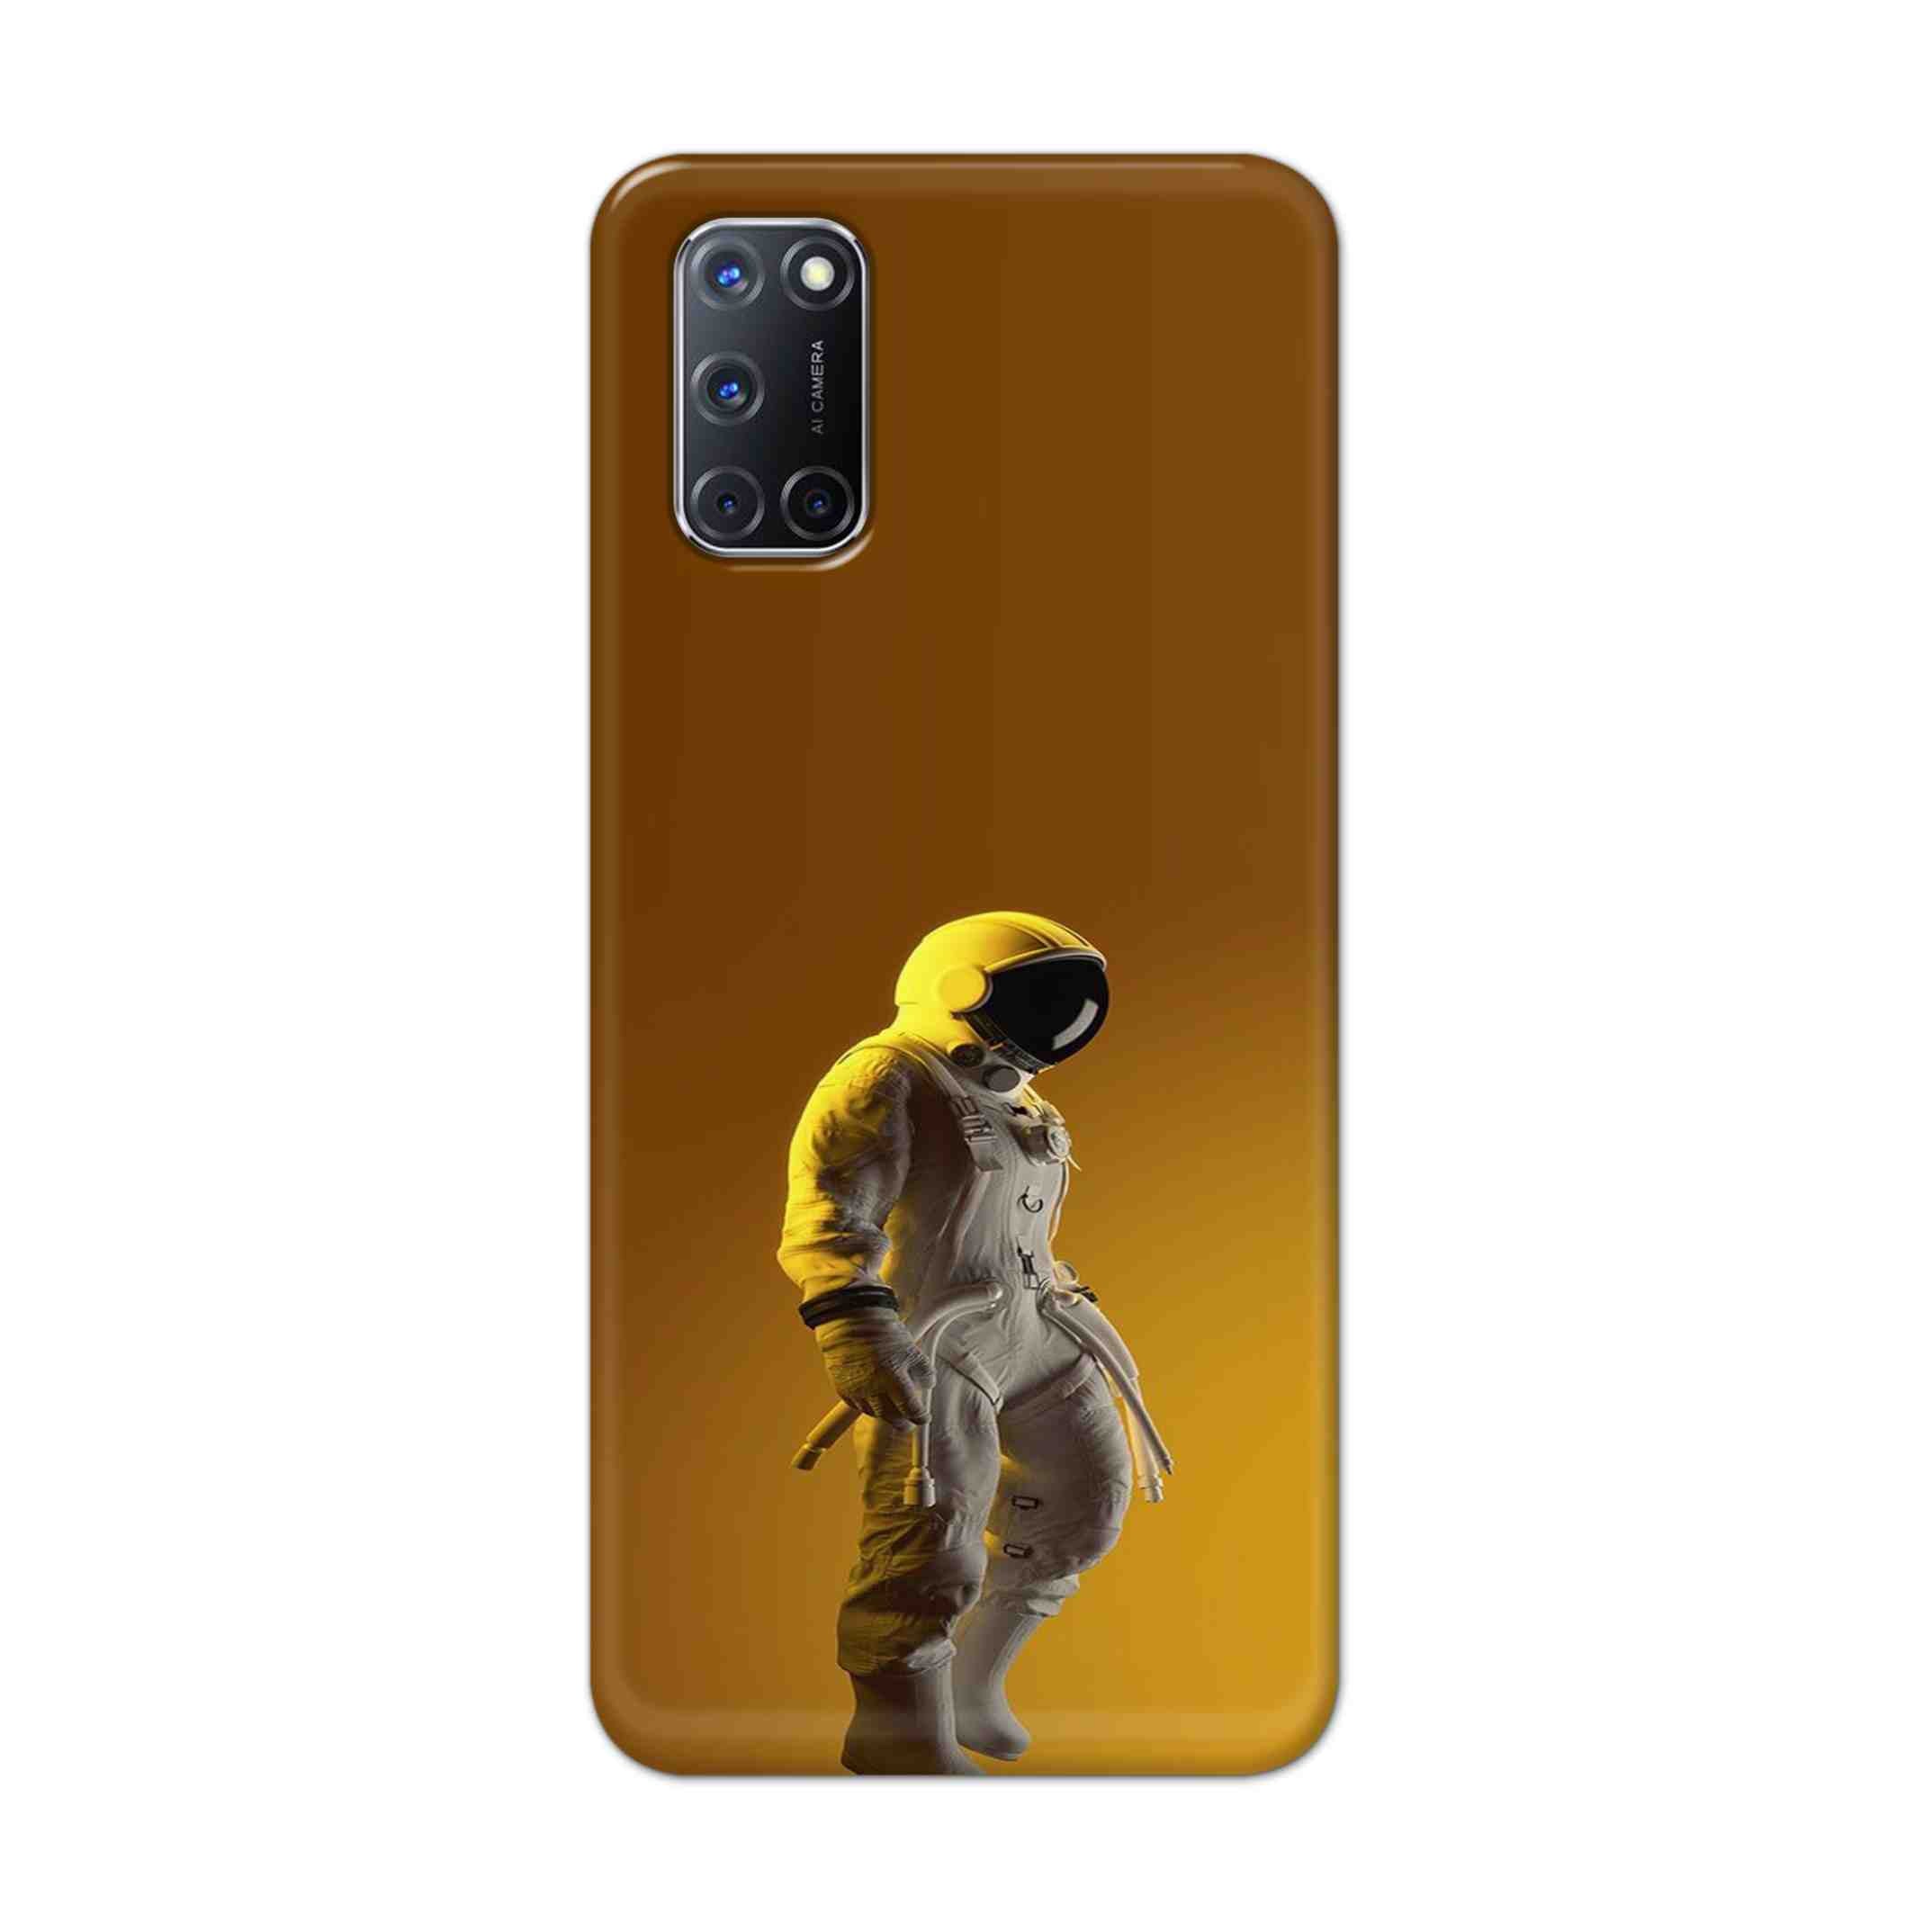 Buy Yellow Astronaut Hard Back Mobile Phone Case Cover For Oppo A52 Online